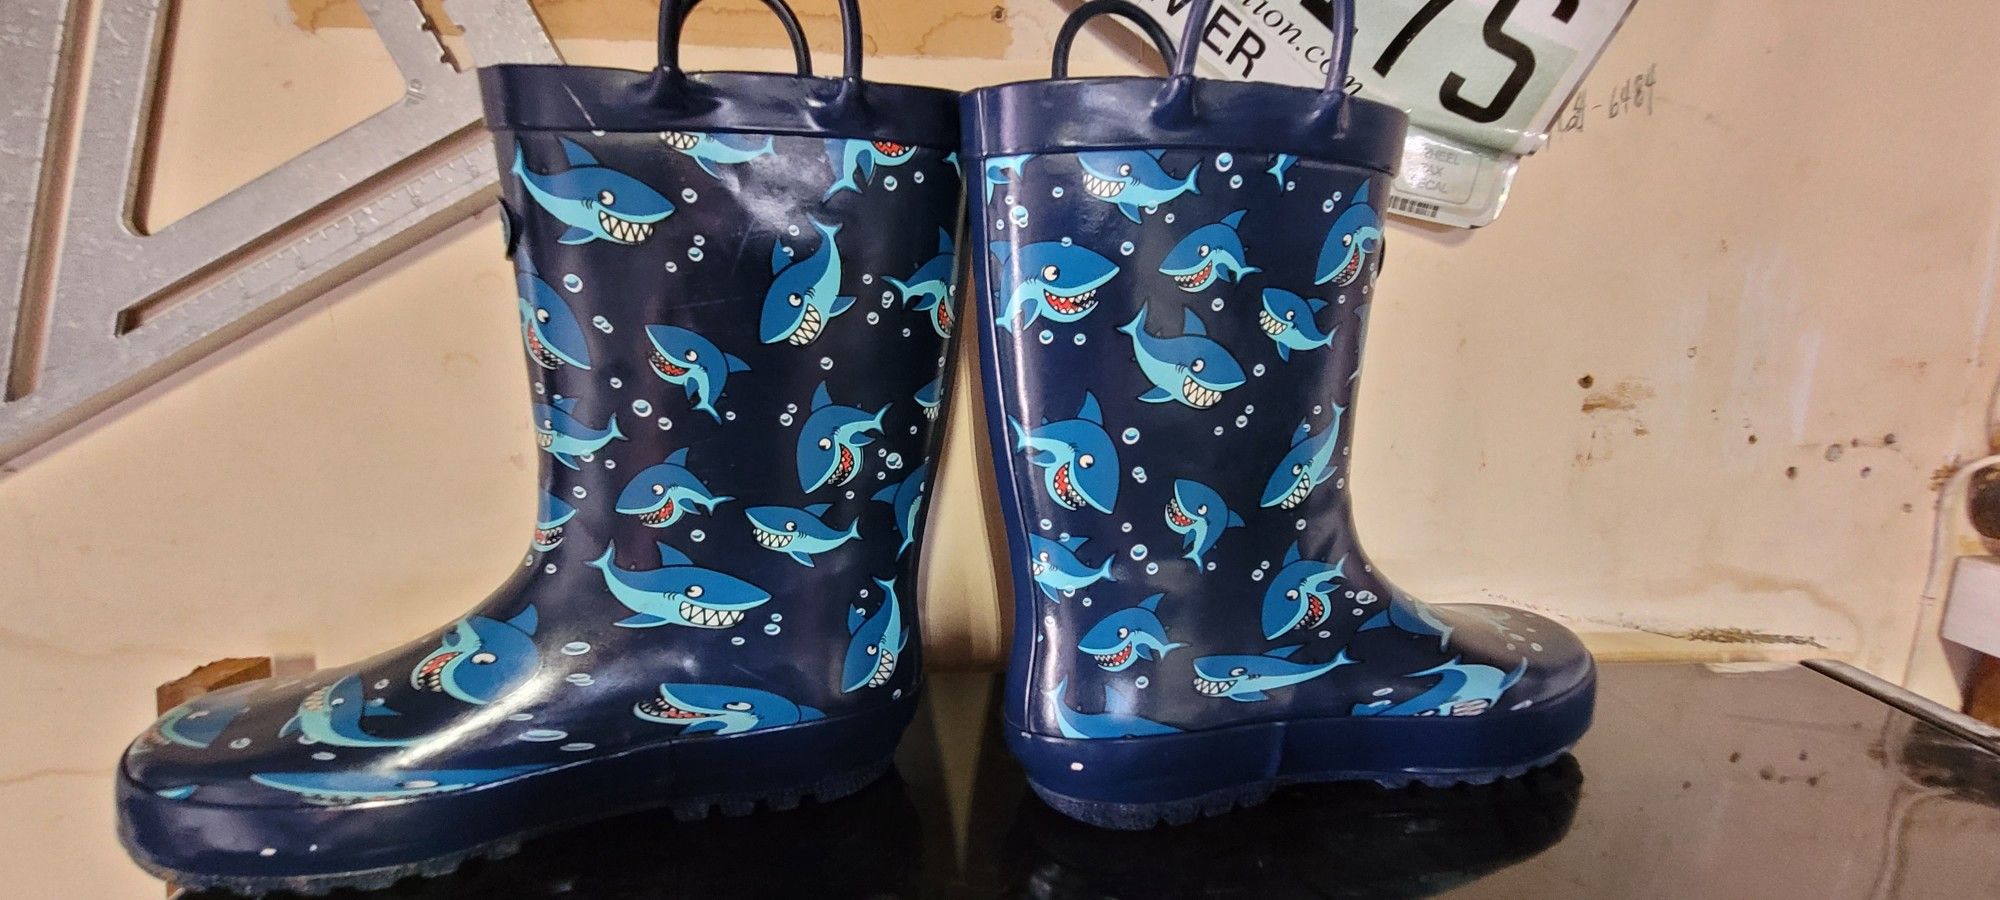 Outee Waterproof Rubber Rain Boots for Kids

